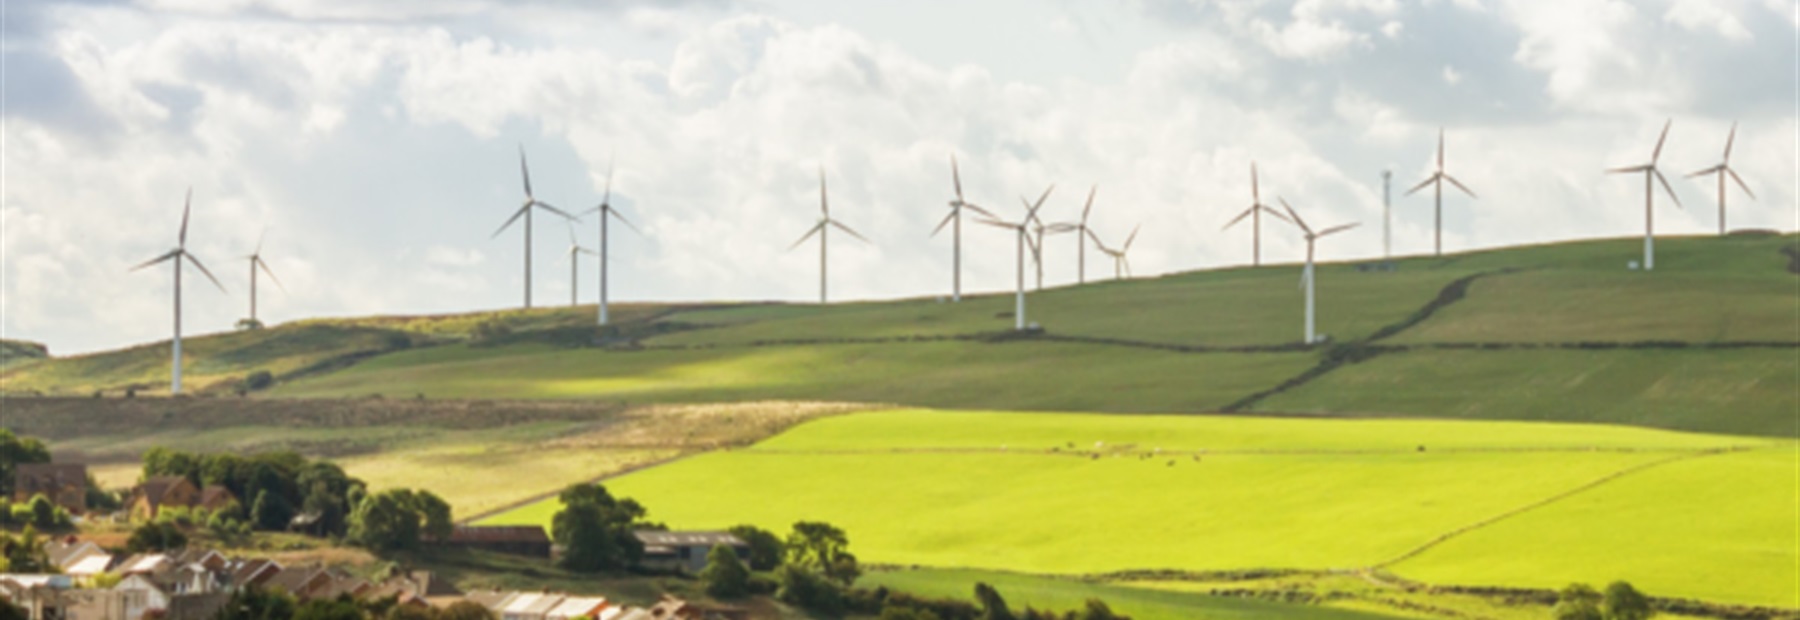 Wind turbines in the countryside  